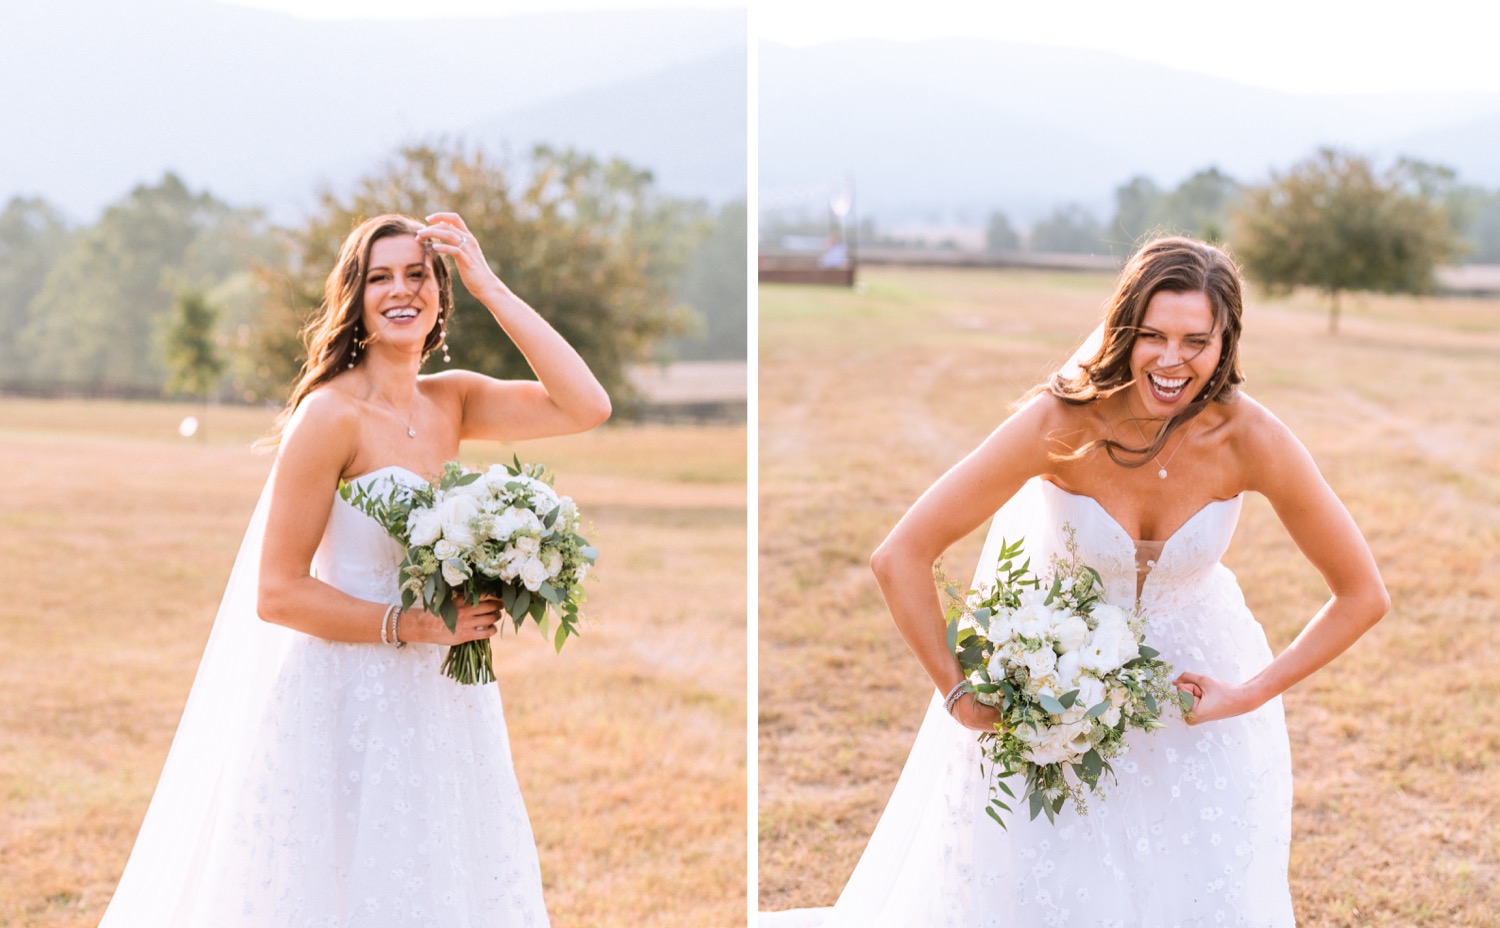 bride with her white floral arrangement acting silly on her wedding day